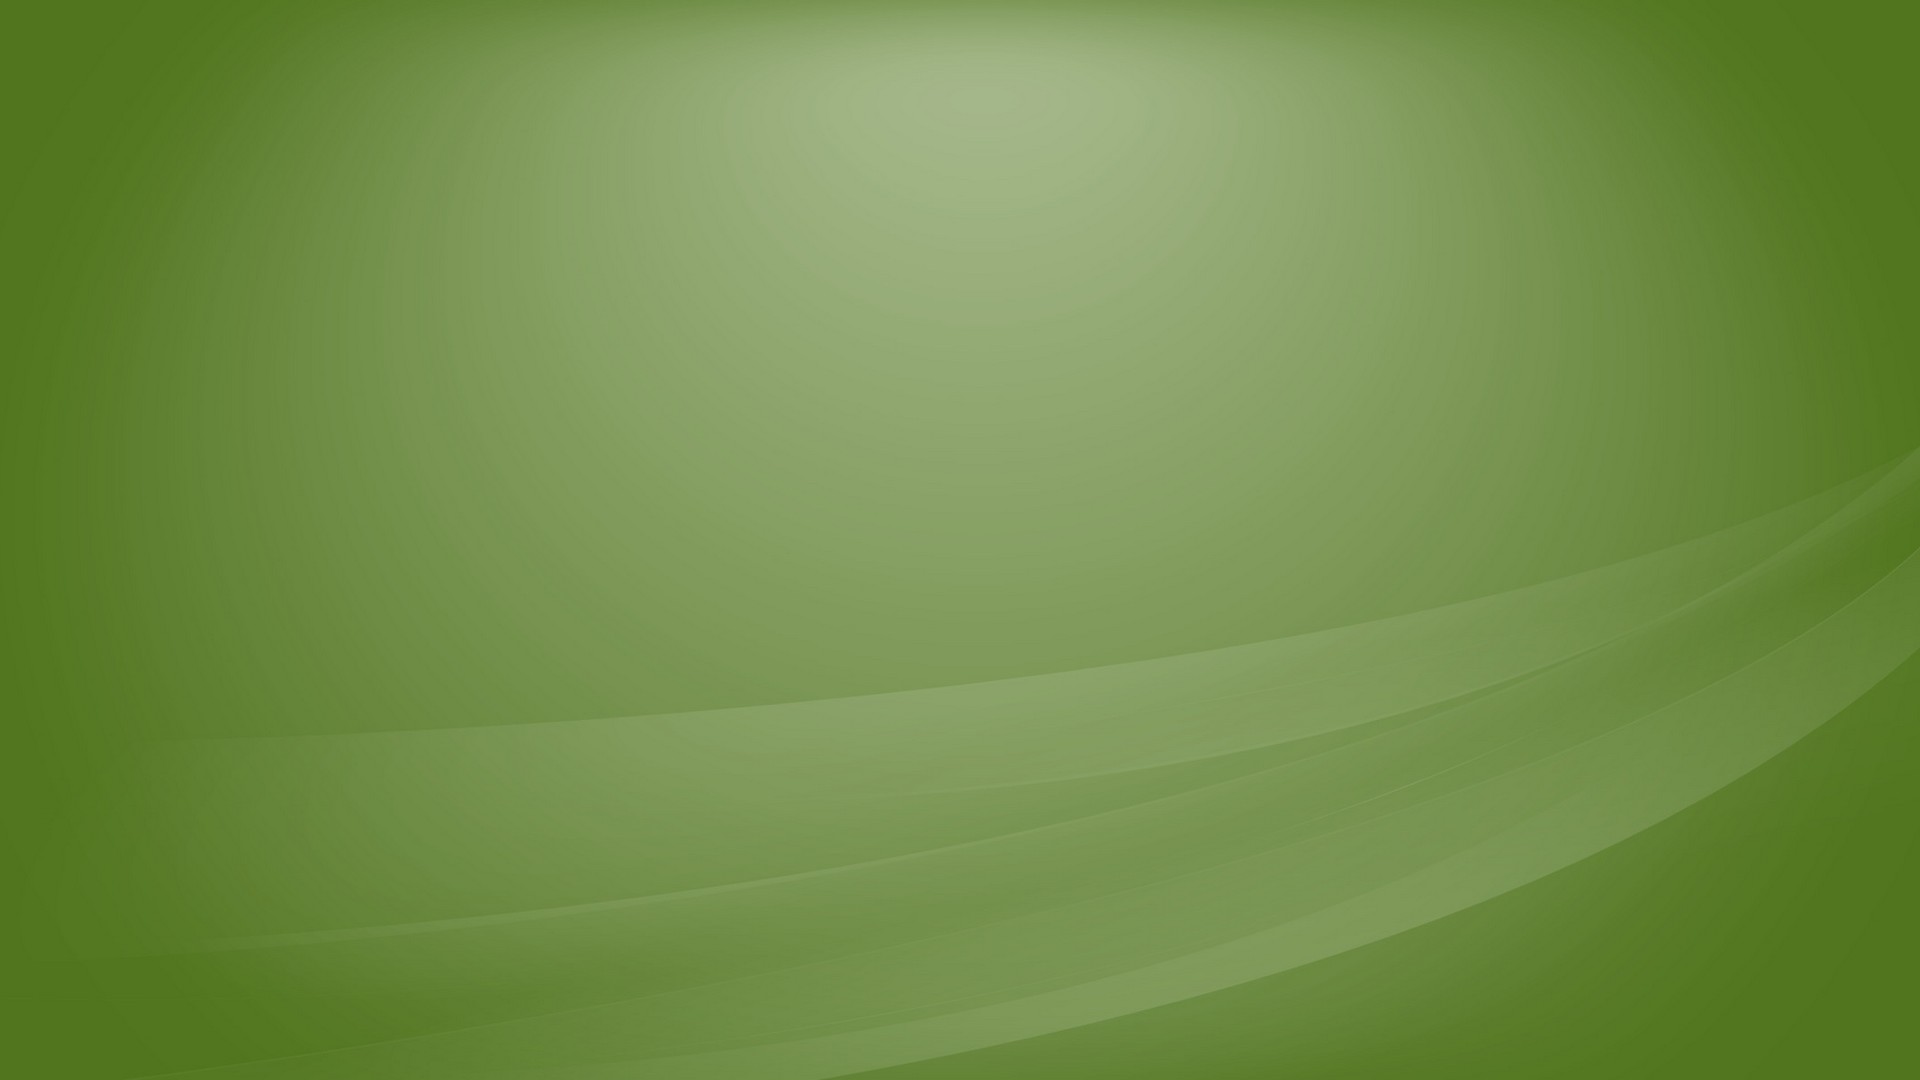 Dark Green Desktop Wallpaper with image resolution 1920x1080 pixel. You can use this wallpaper as background for your desktop Computer Screensavers, Android or iPhone smartphones